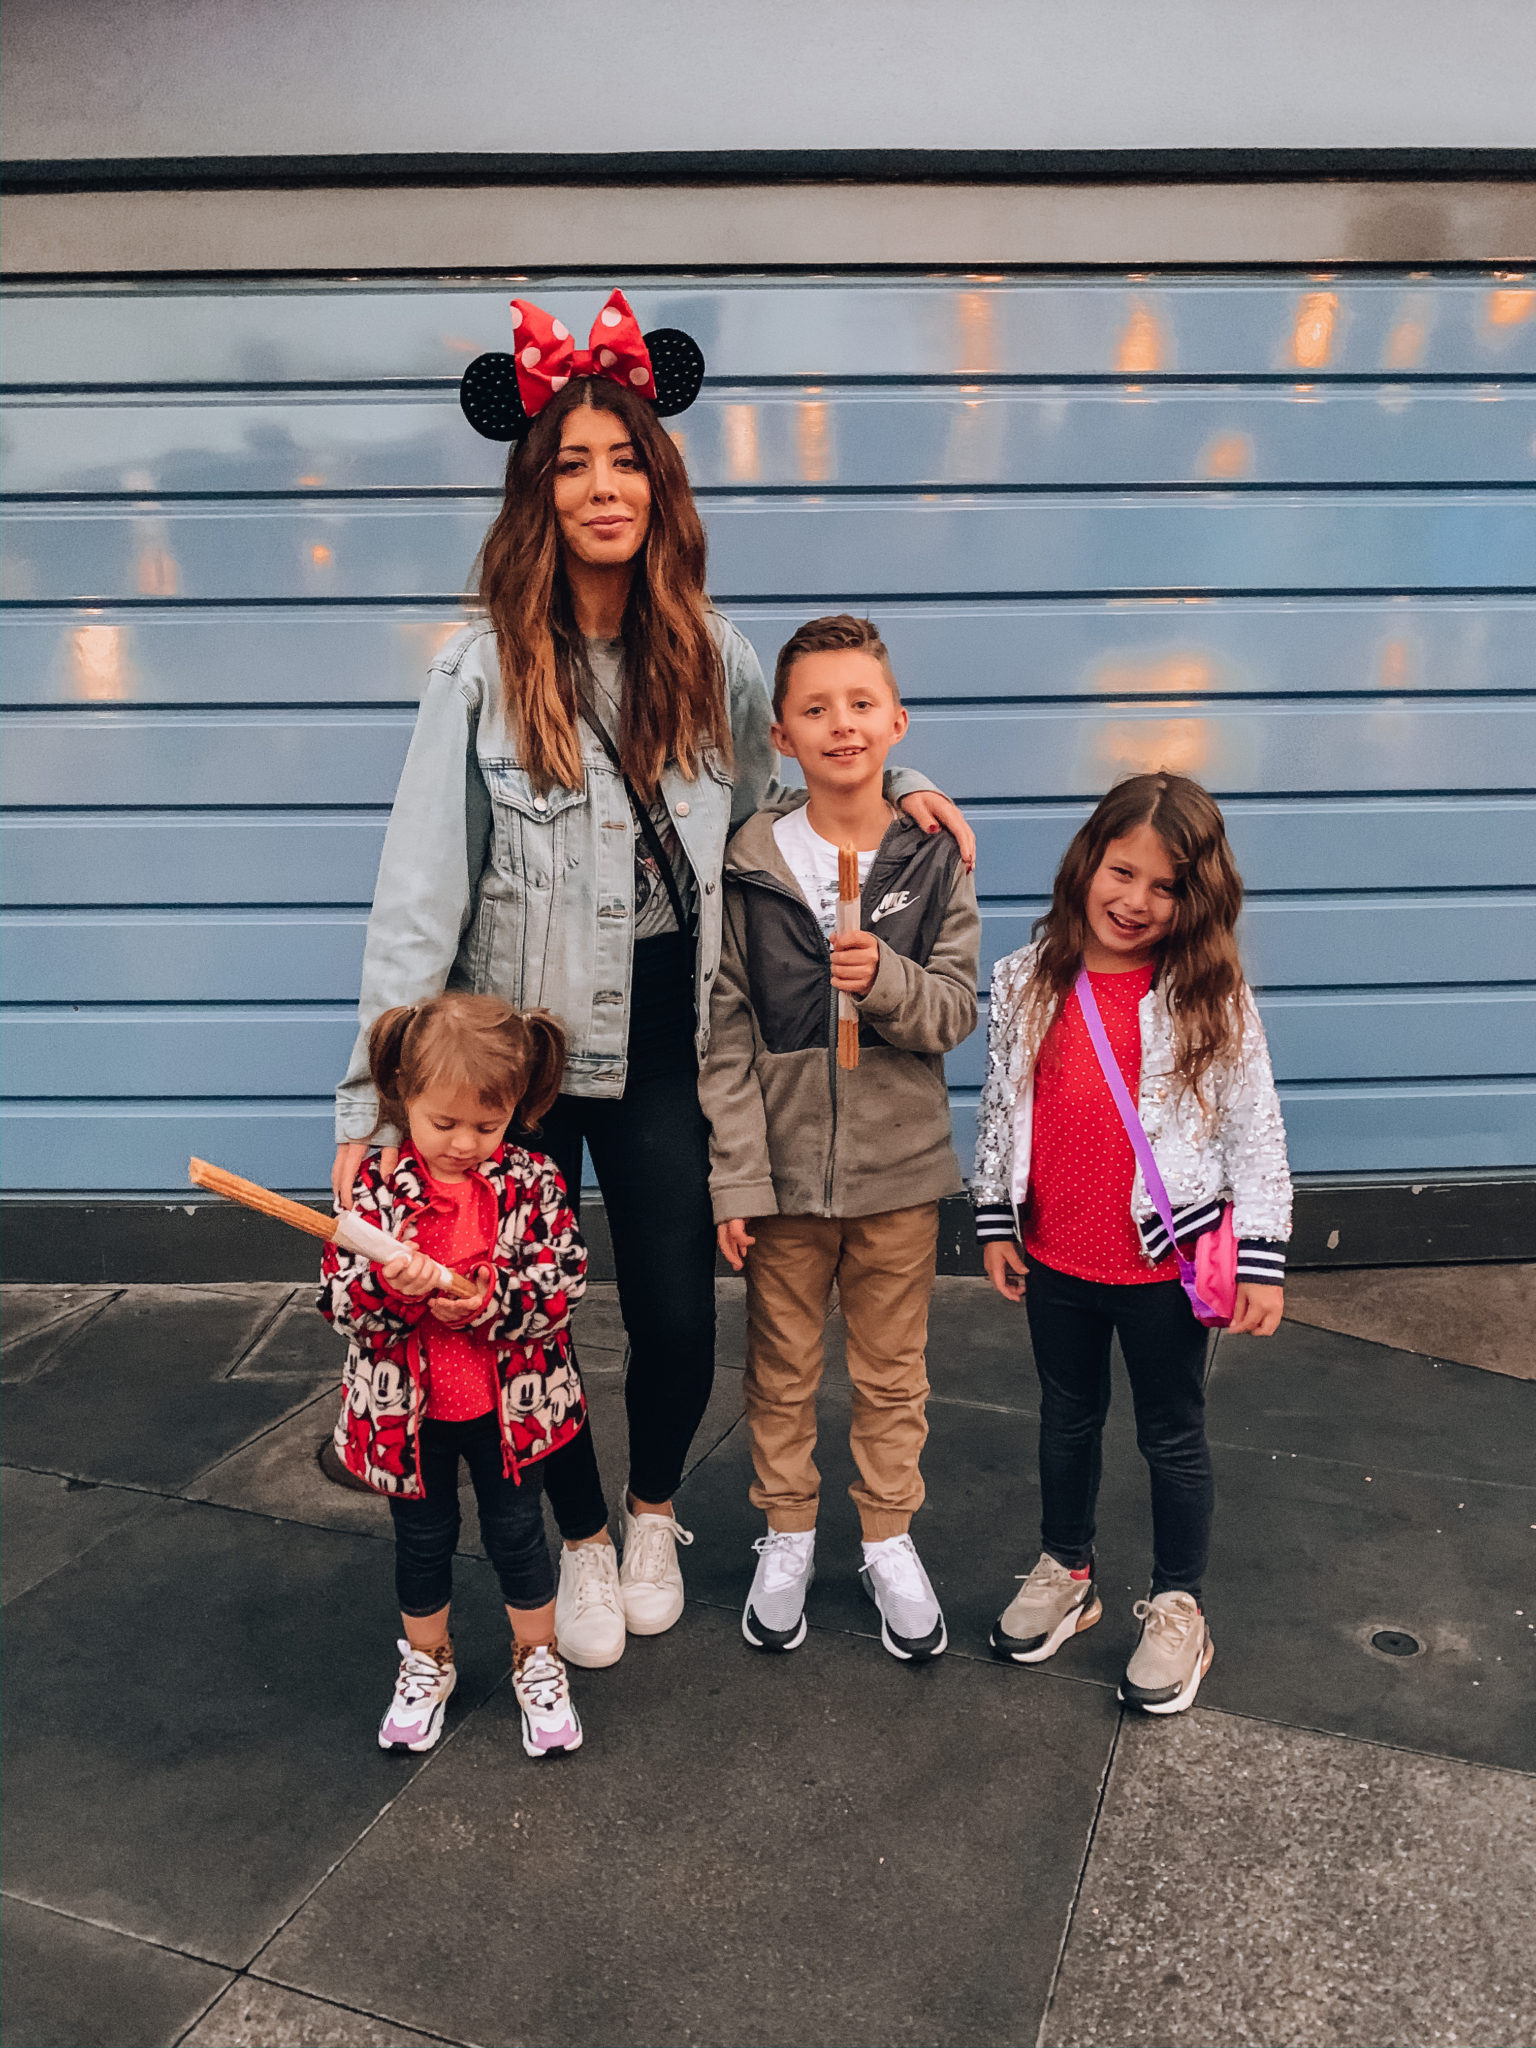 Disneyland Tips for Families! by popular San Francisco life and style blog, The Girl in the Yellow Dress: image of a family at Disneyland and wearing Nike Air Max 270 RT, Nike Air Max 270, H&M Puff-sleeved Jersey Bodysuit, American Eagle High Rise Mom Jeans, FitFlop RALLY Scallop Leather Sneakers, Disney Minnie Mouse Satin Polka Dot Bow Ear Headband, Gucci belt, Amazon adidas Originals Men's Trefoil Tee, Nike Sportswear Club Fleece, Amazon adidas Originals Boys' Kids Trefoil Tee, and Nordstrom Sports Jogger Pants ADIDAS.